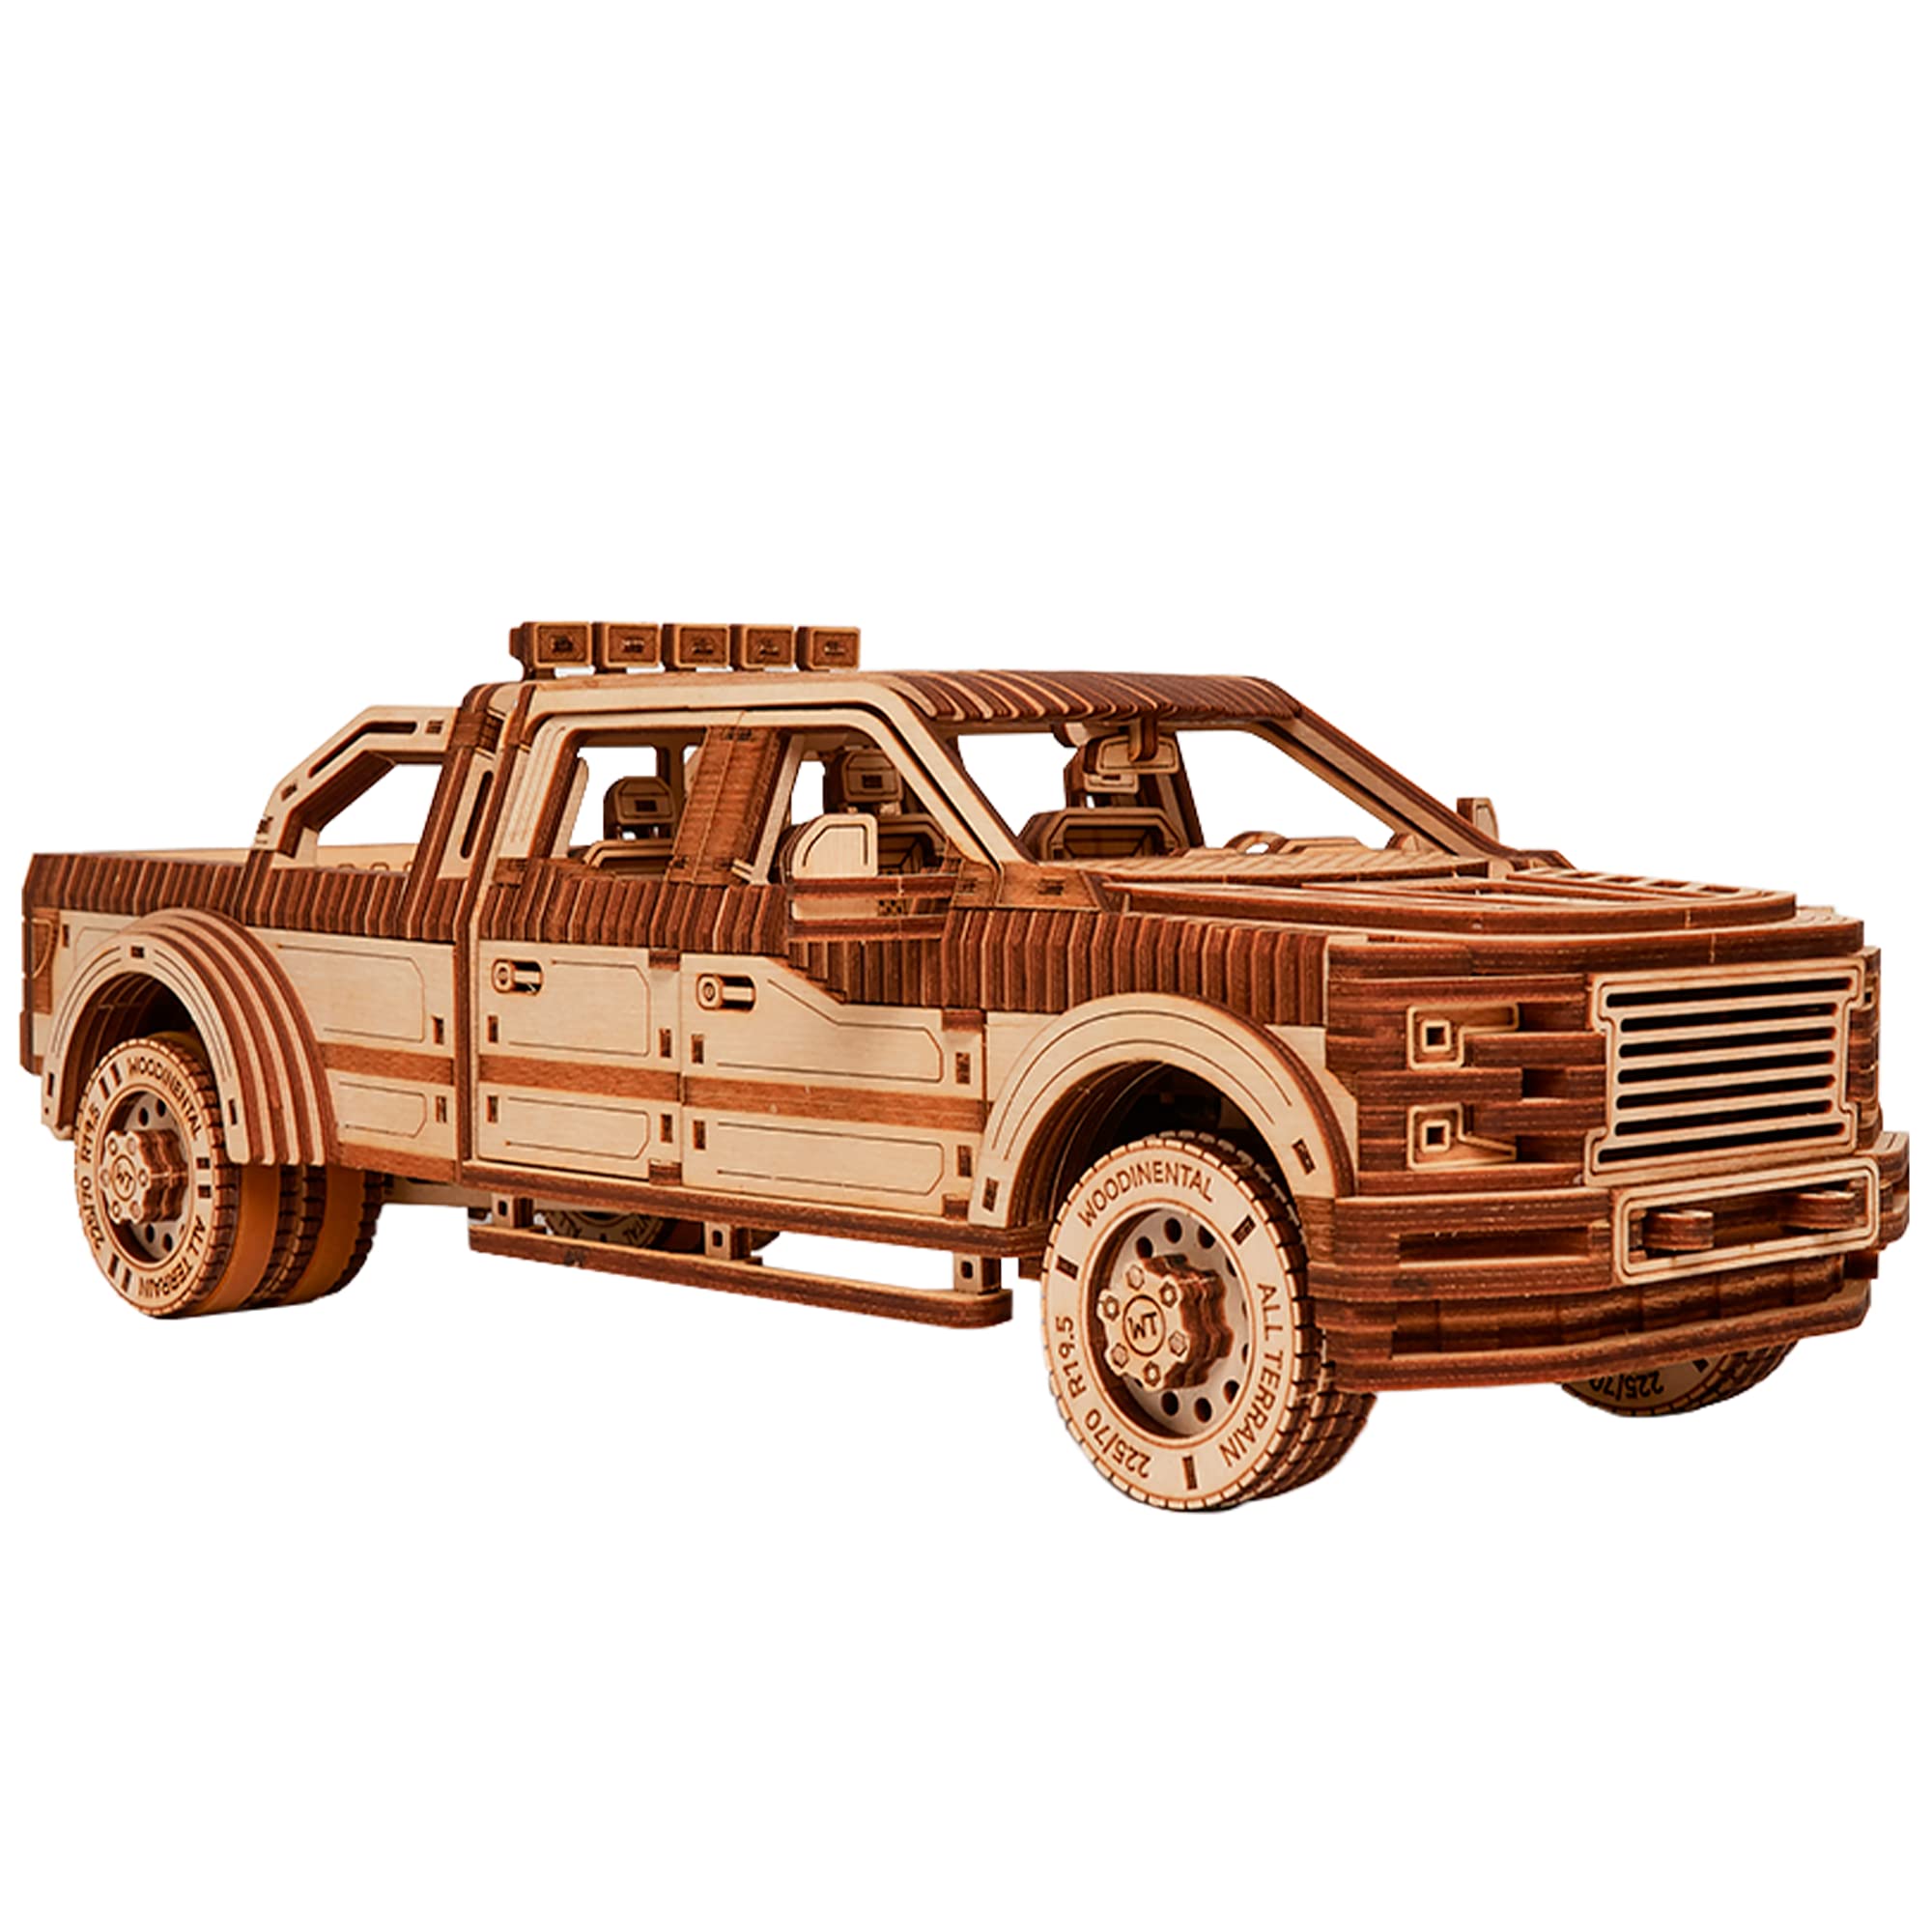 Wood Trick Pickup Truck SUV Car Wooden 3D Puzzles for Adults and Kids to Build - Rides up to 32 feet - Engineering DIY Mechan